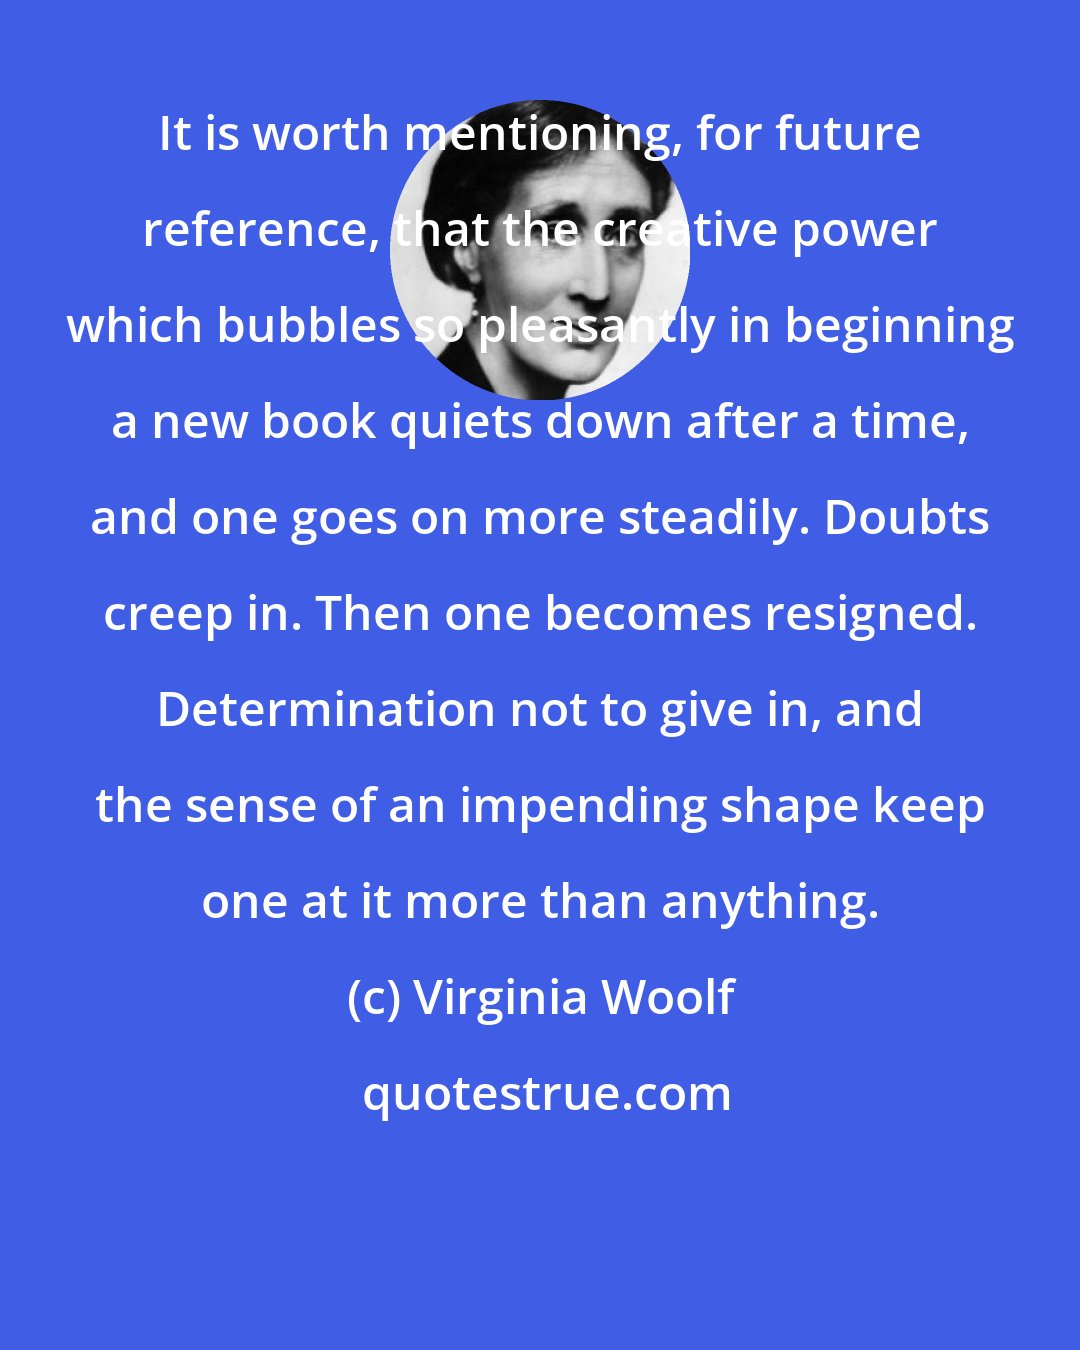 Virginia Woolf: It is worth mentioning, for future reference, that the creative power which bubbles so pleasantly in beginning a new book quiets down after a time, and one goes on more steadily. Doubts creep in. Then one becomes resigned. Determination not to give in, and the sense of an impending shape keep one at it more than anything.